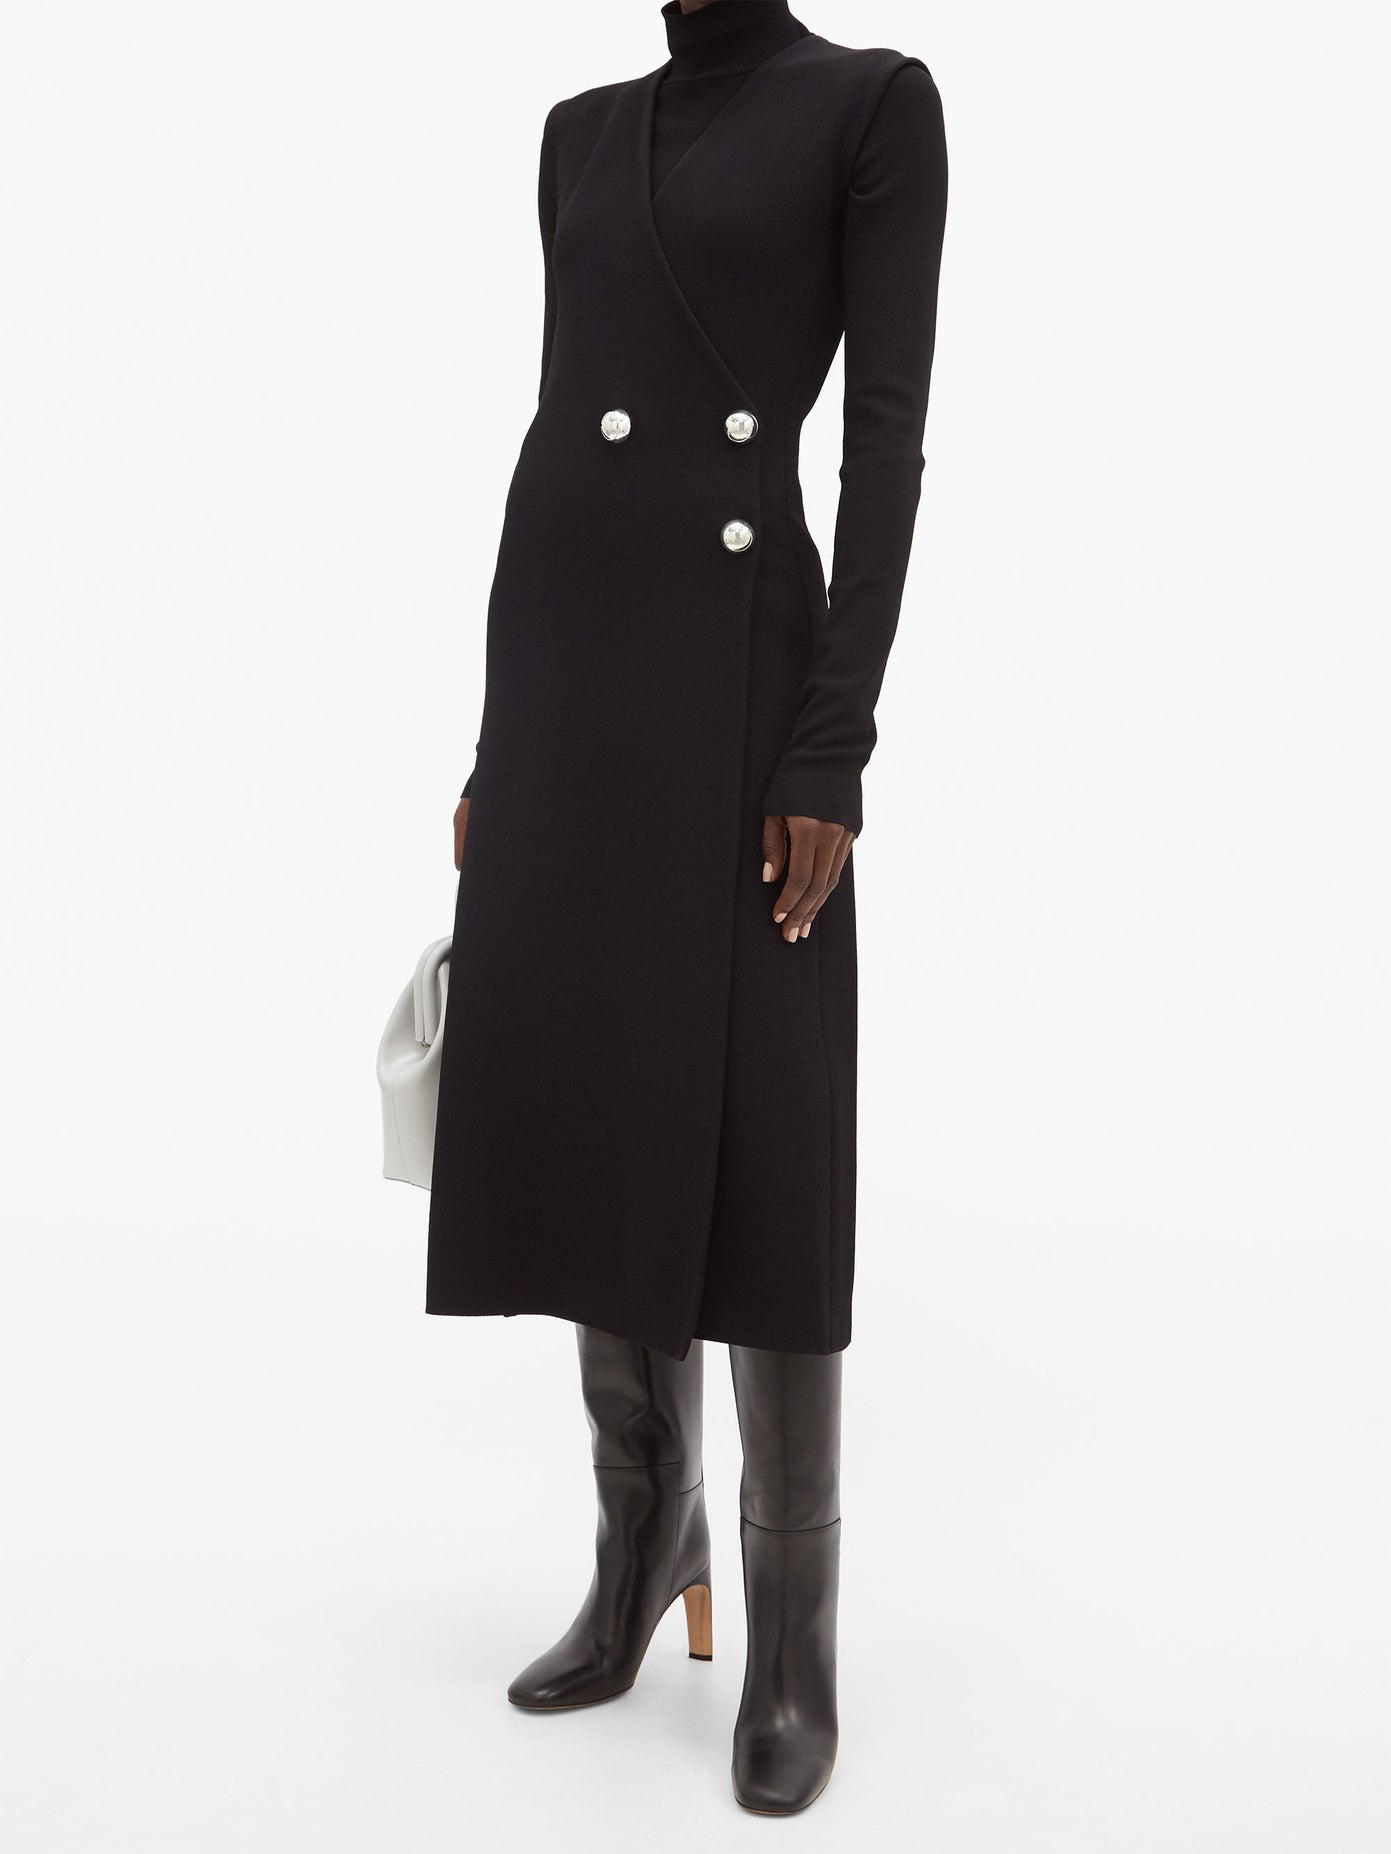 Jil Sander - Nappa-Leather Knee-High Boots | ABOUT ICONS